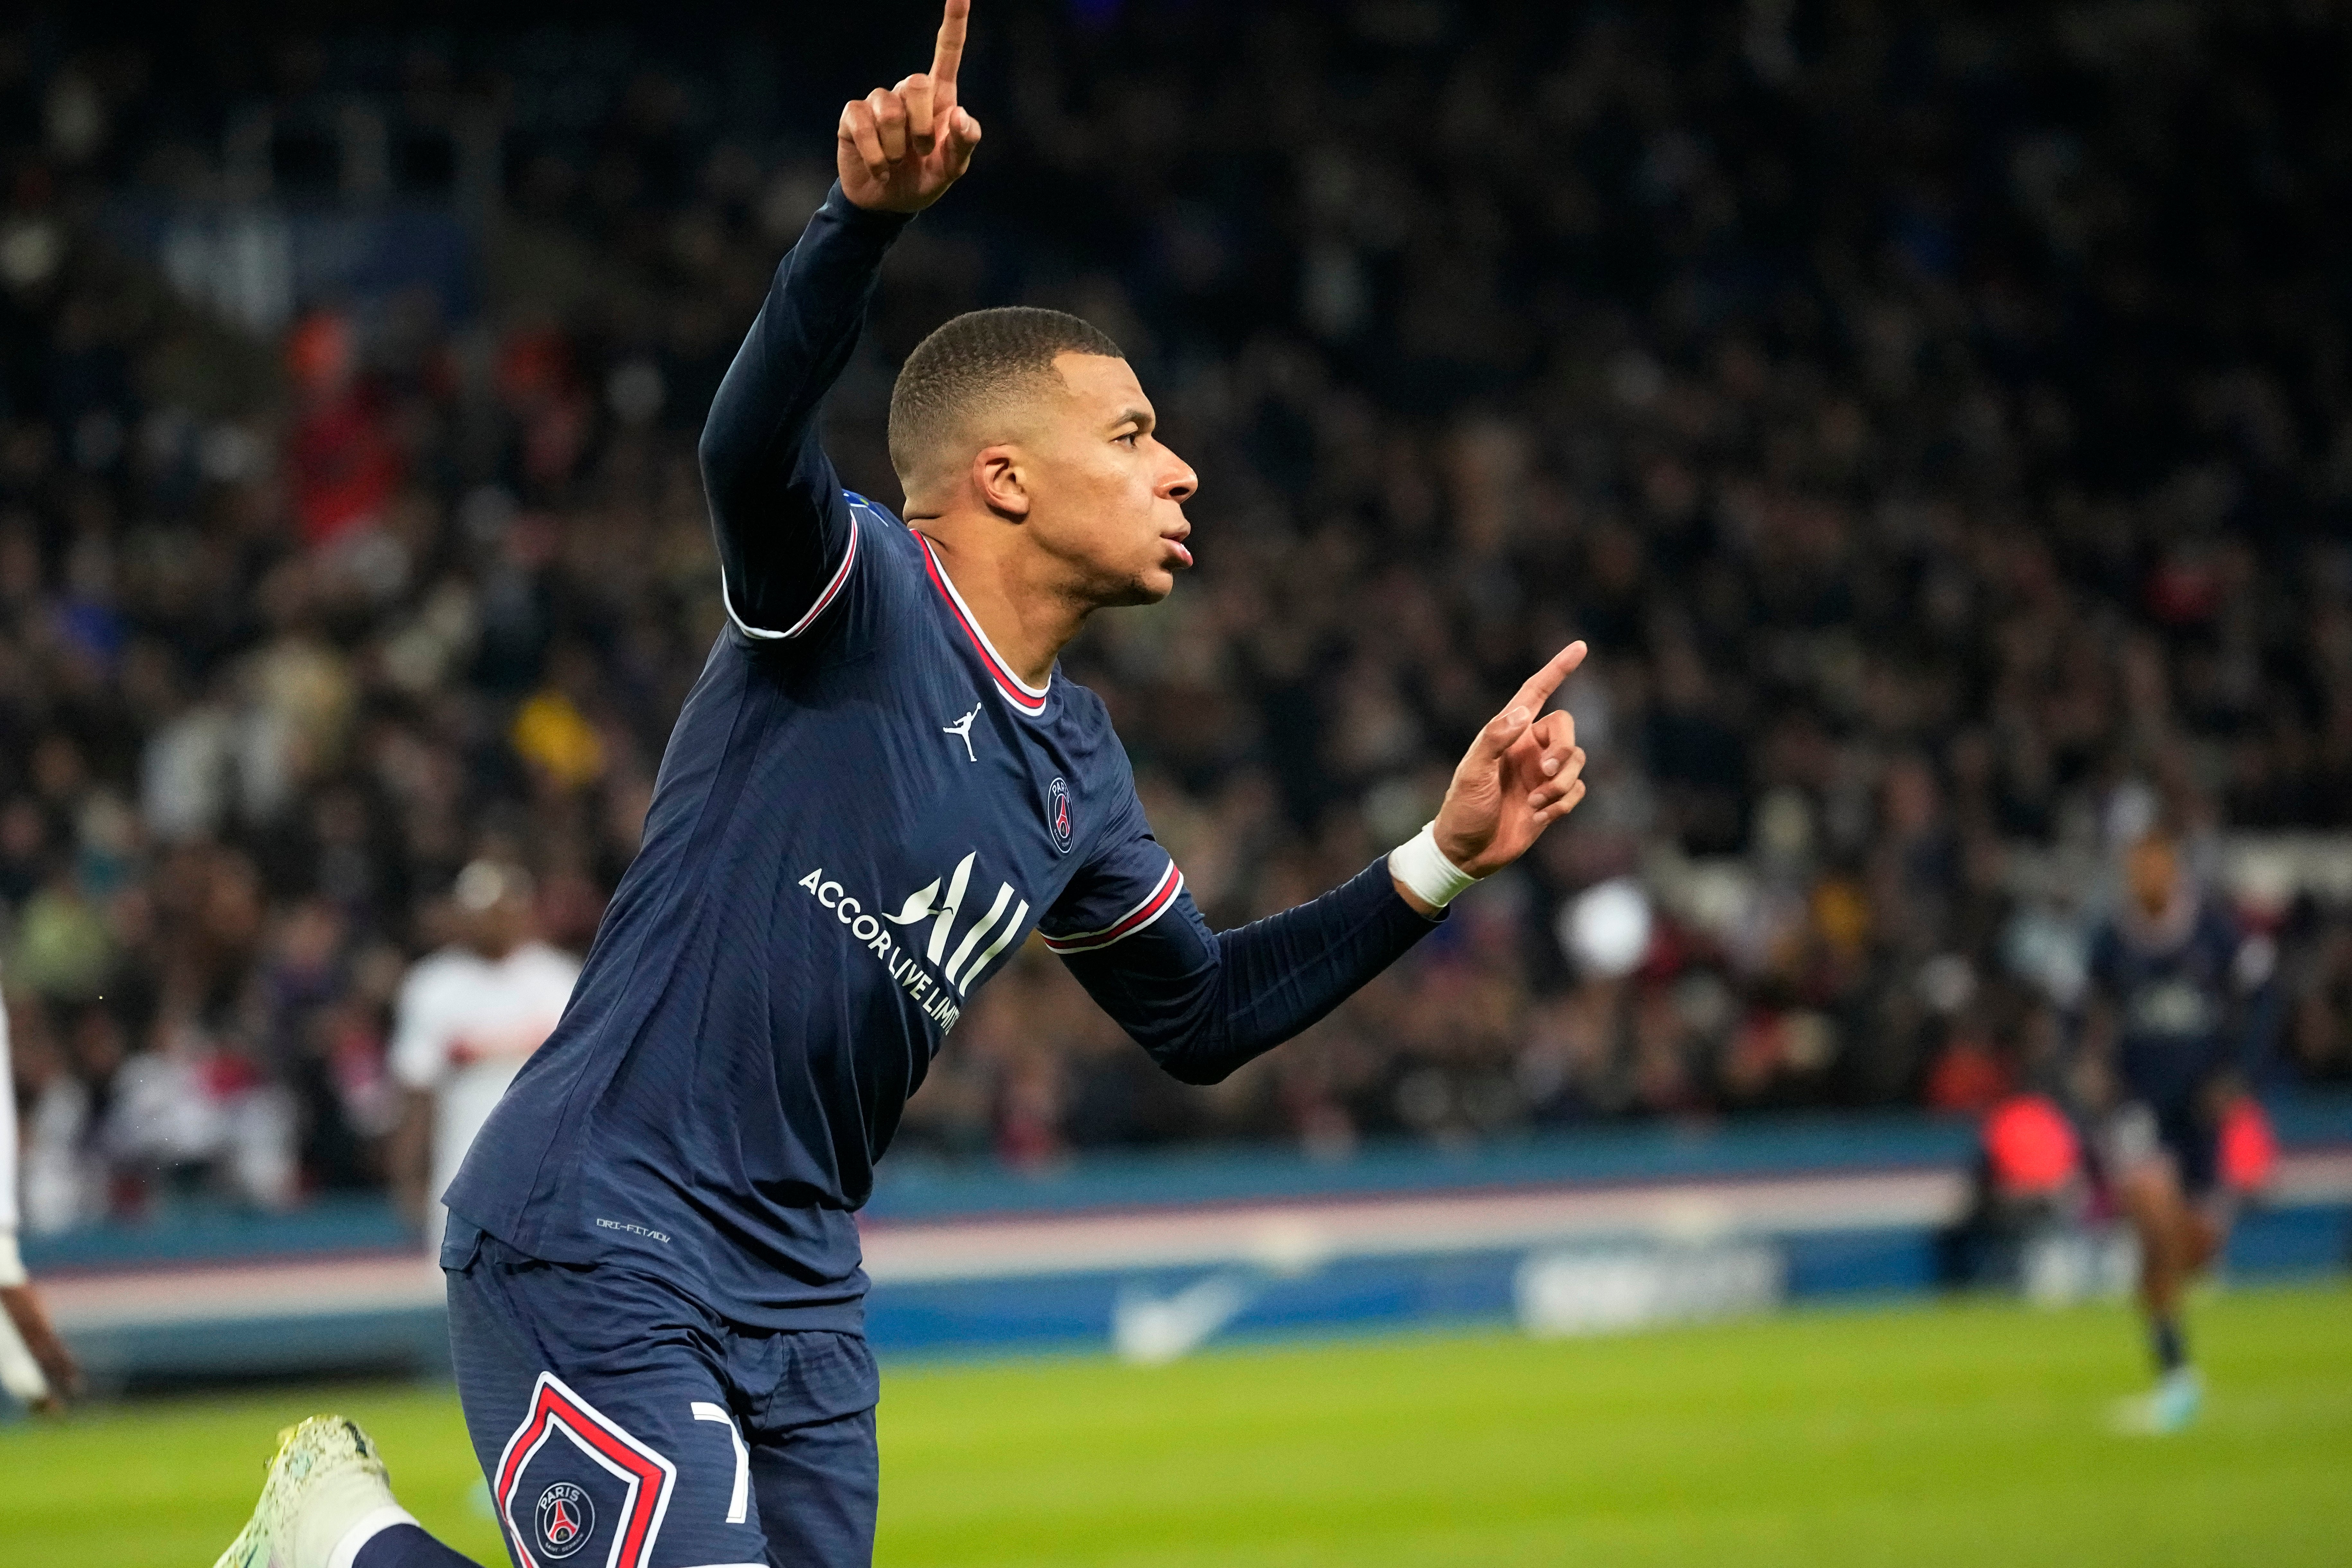 Kylian Mbappe was on the scoresheet for PSG with a 5-1 win against Lorient (AP Photo/Michel Euler)